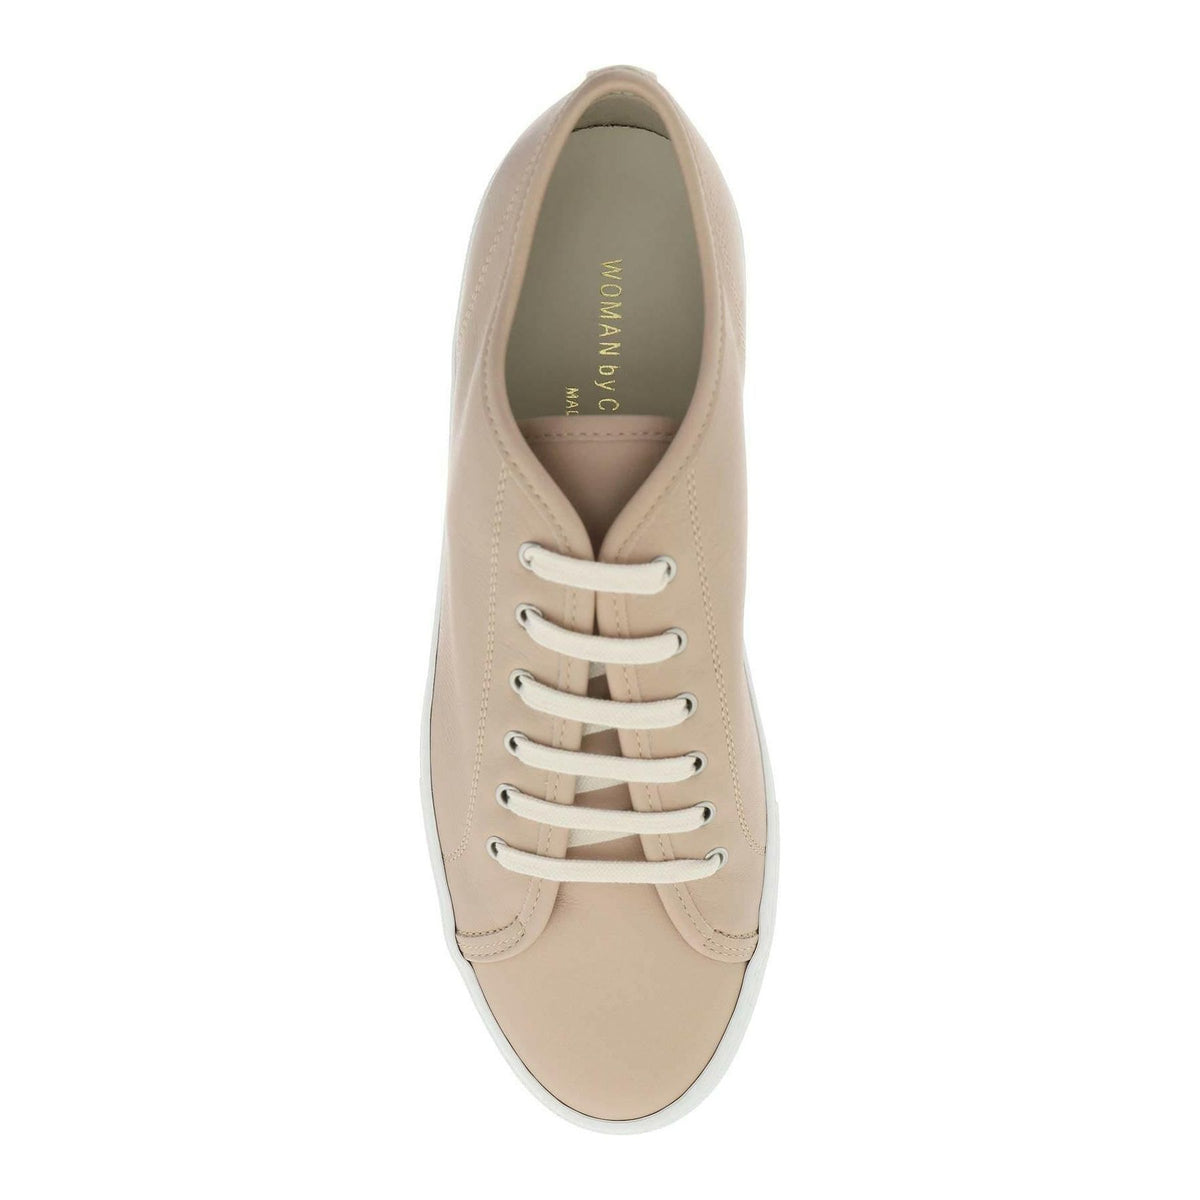 COMMON PROJECTS - Leather Tournament Low Super Sneakers - JOHN JULIA